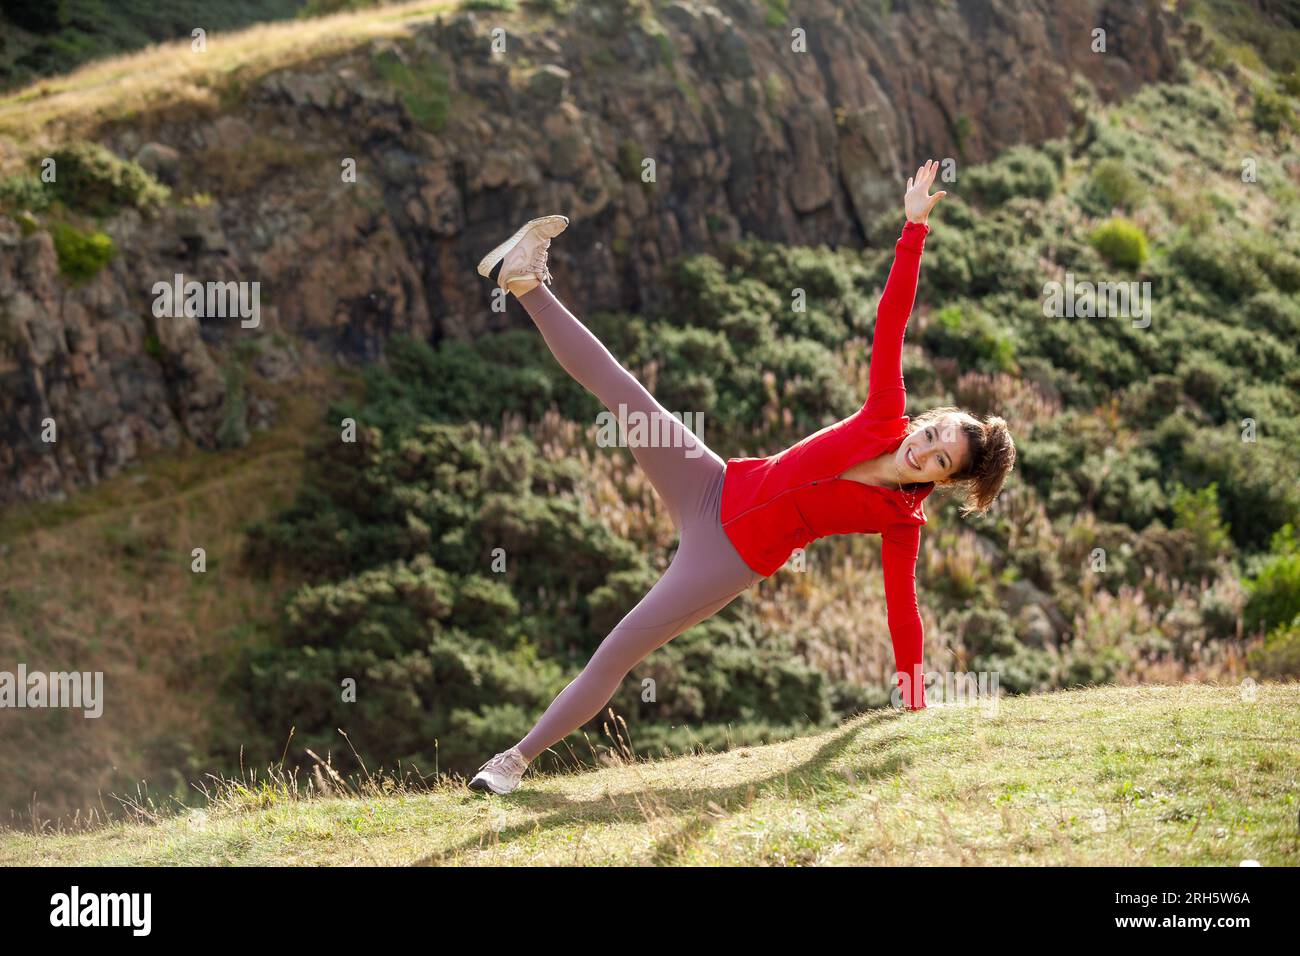 A young woman wearing leggings stretching in a public park in Edinburgh Stock Photo